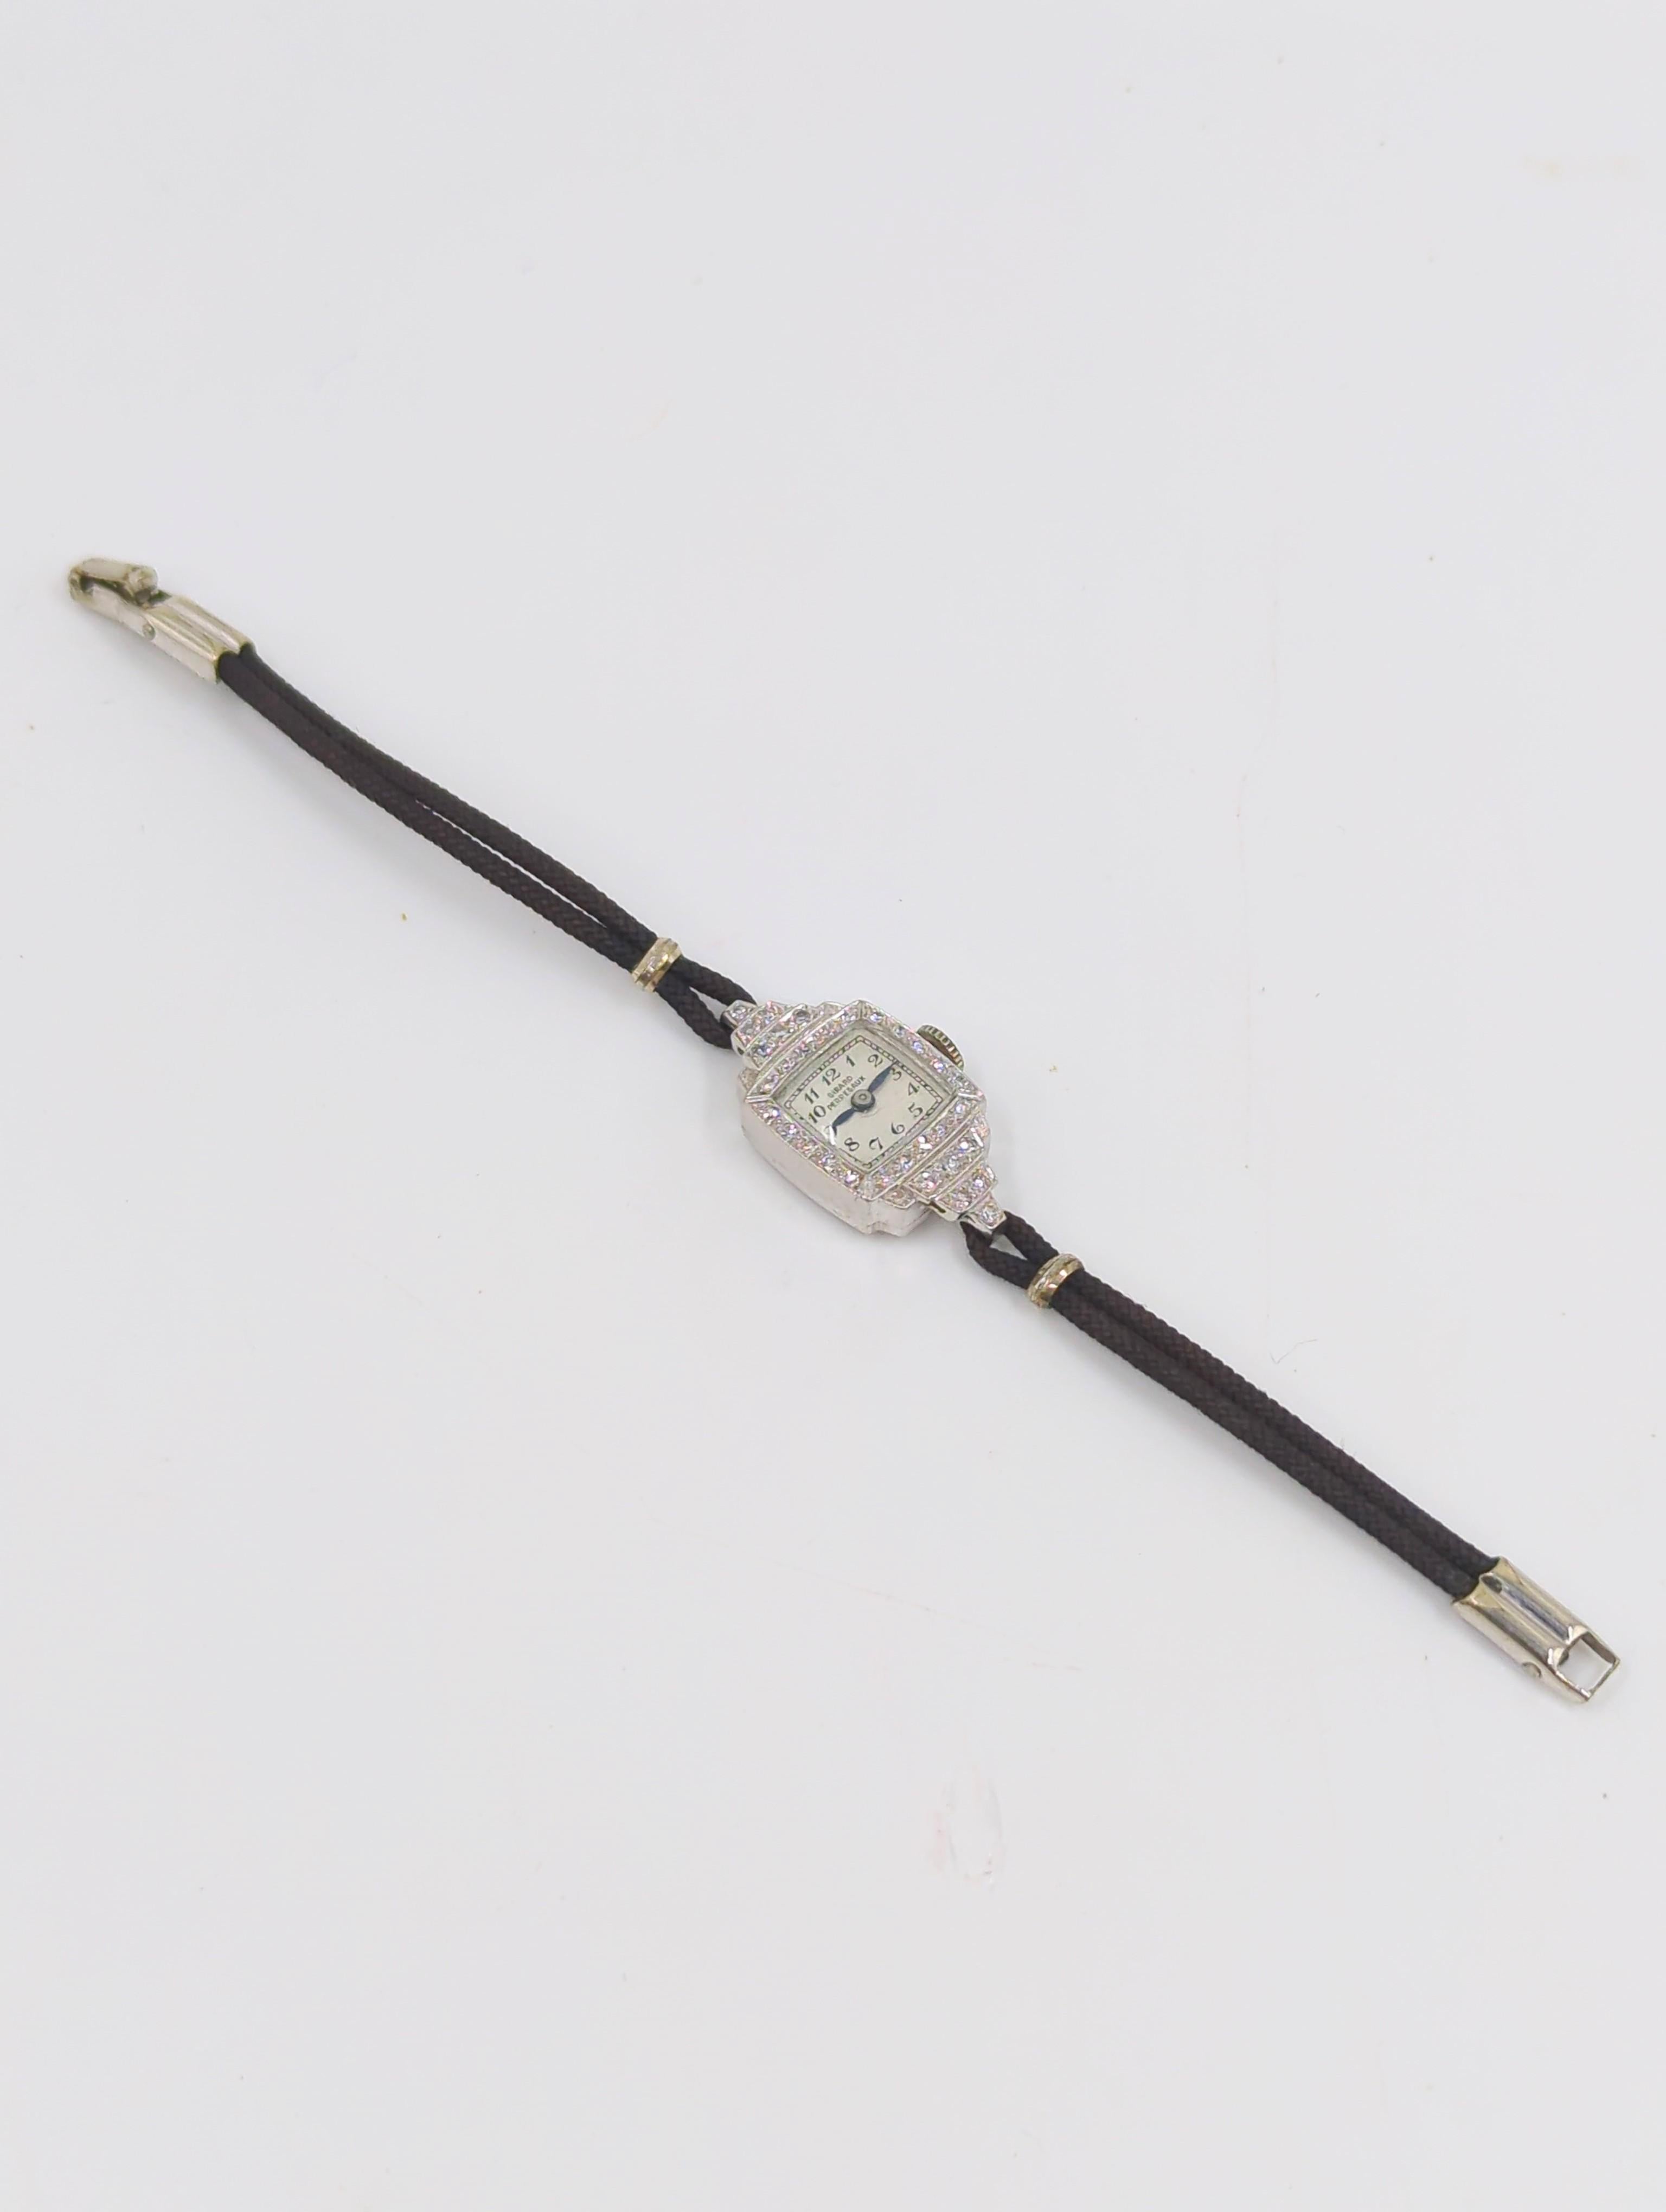 A rare vintage Girard Perregaux ladies platinum and diamonds watch, dainty yet so full of bling, on cord band with metal hardware, with a locking safety clasp, for small 5.75